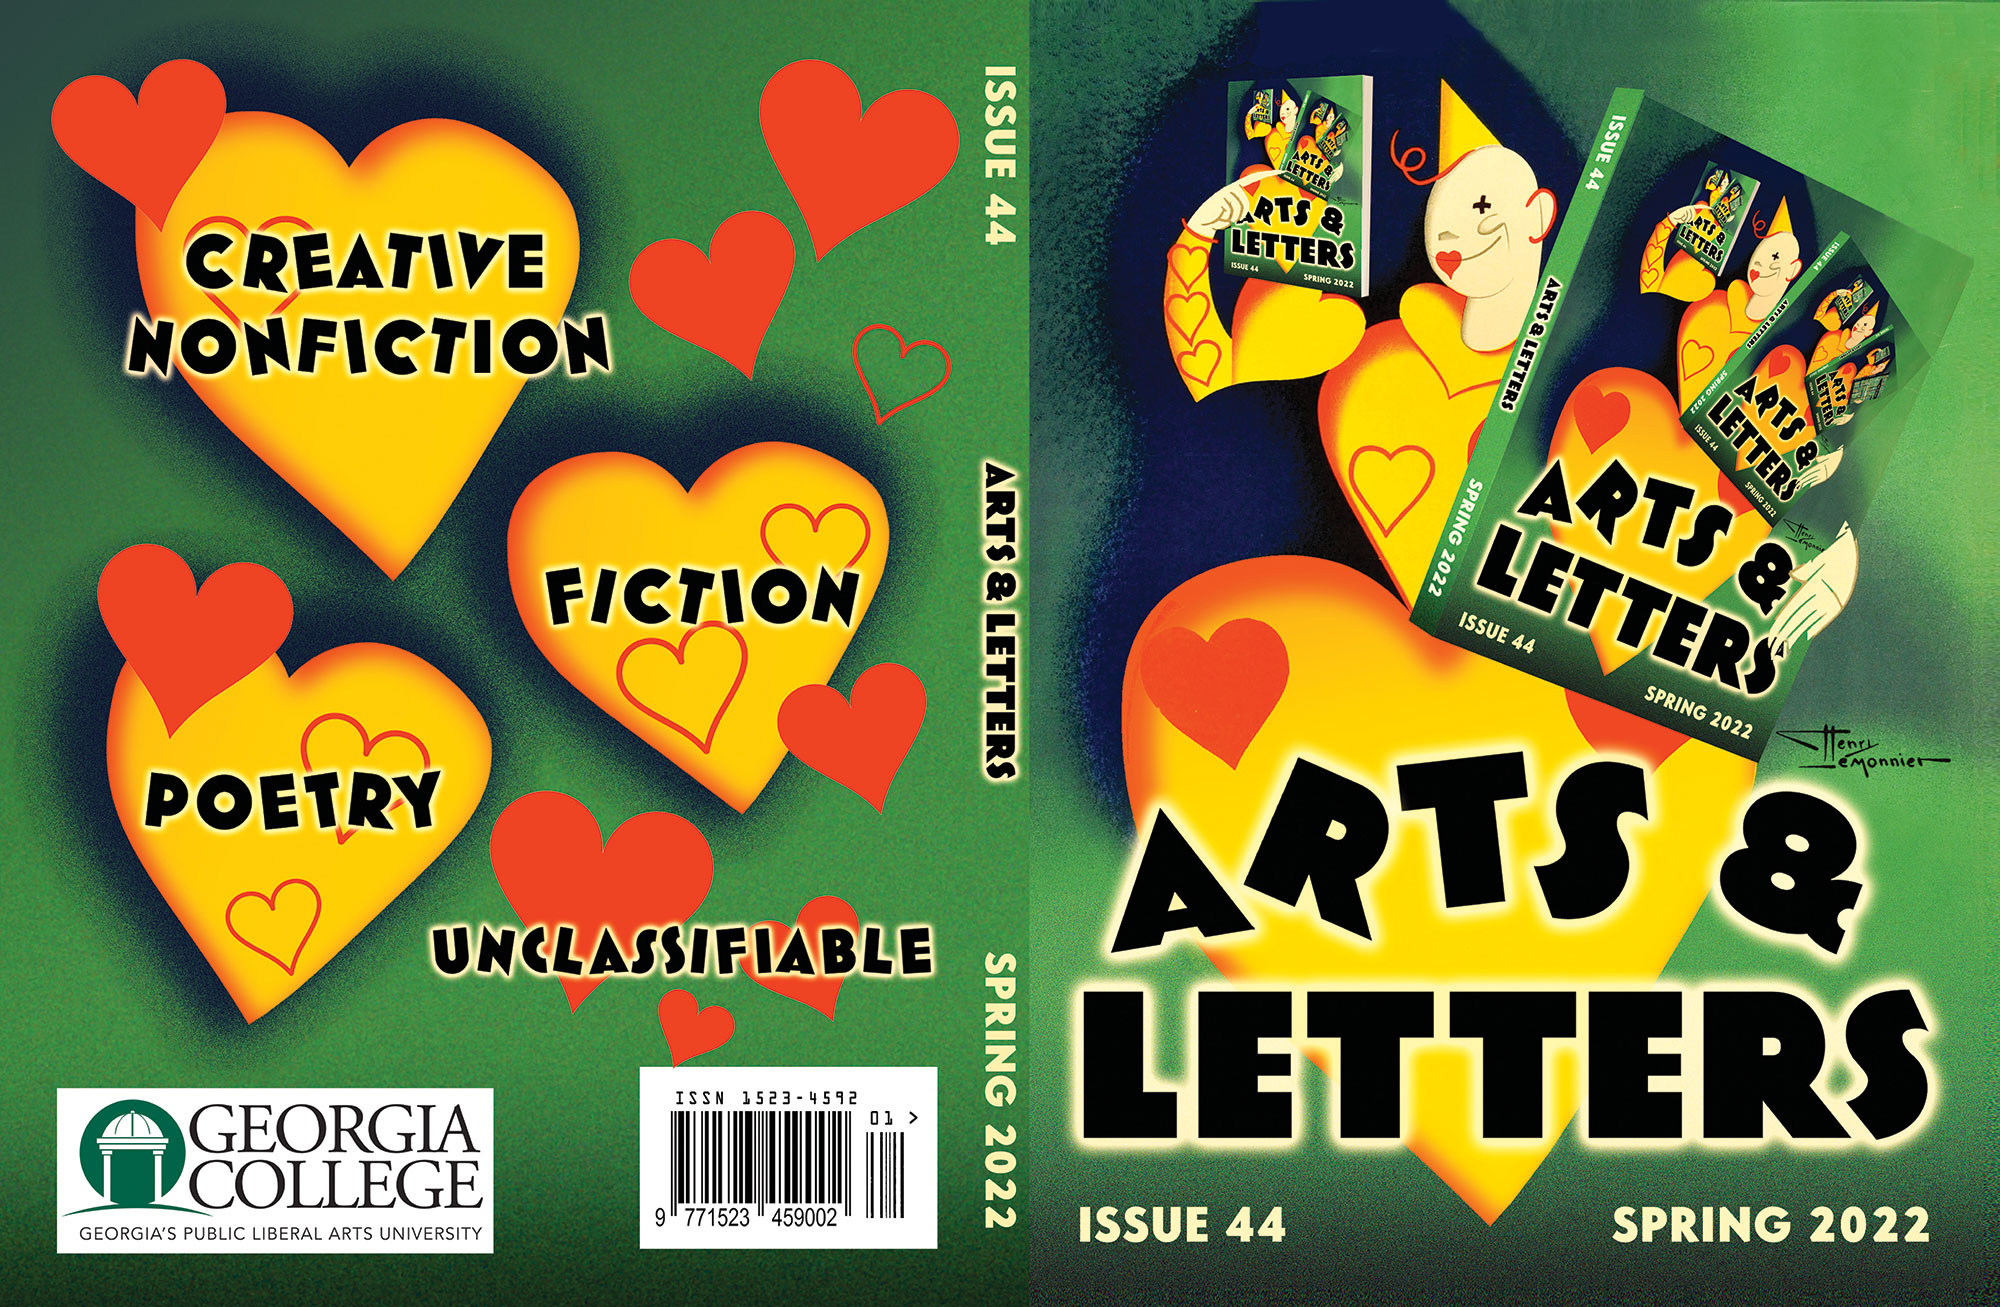 Arts & Letters, Issue 44